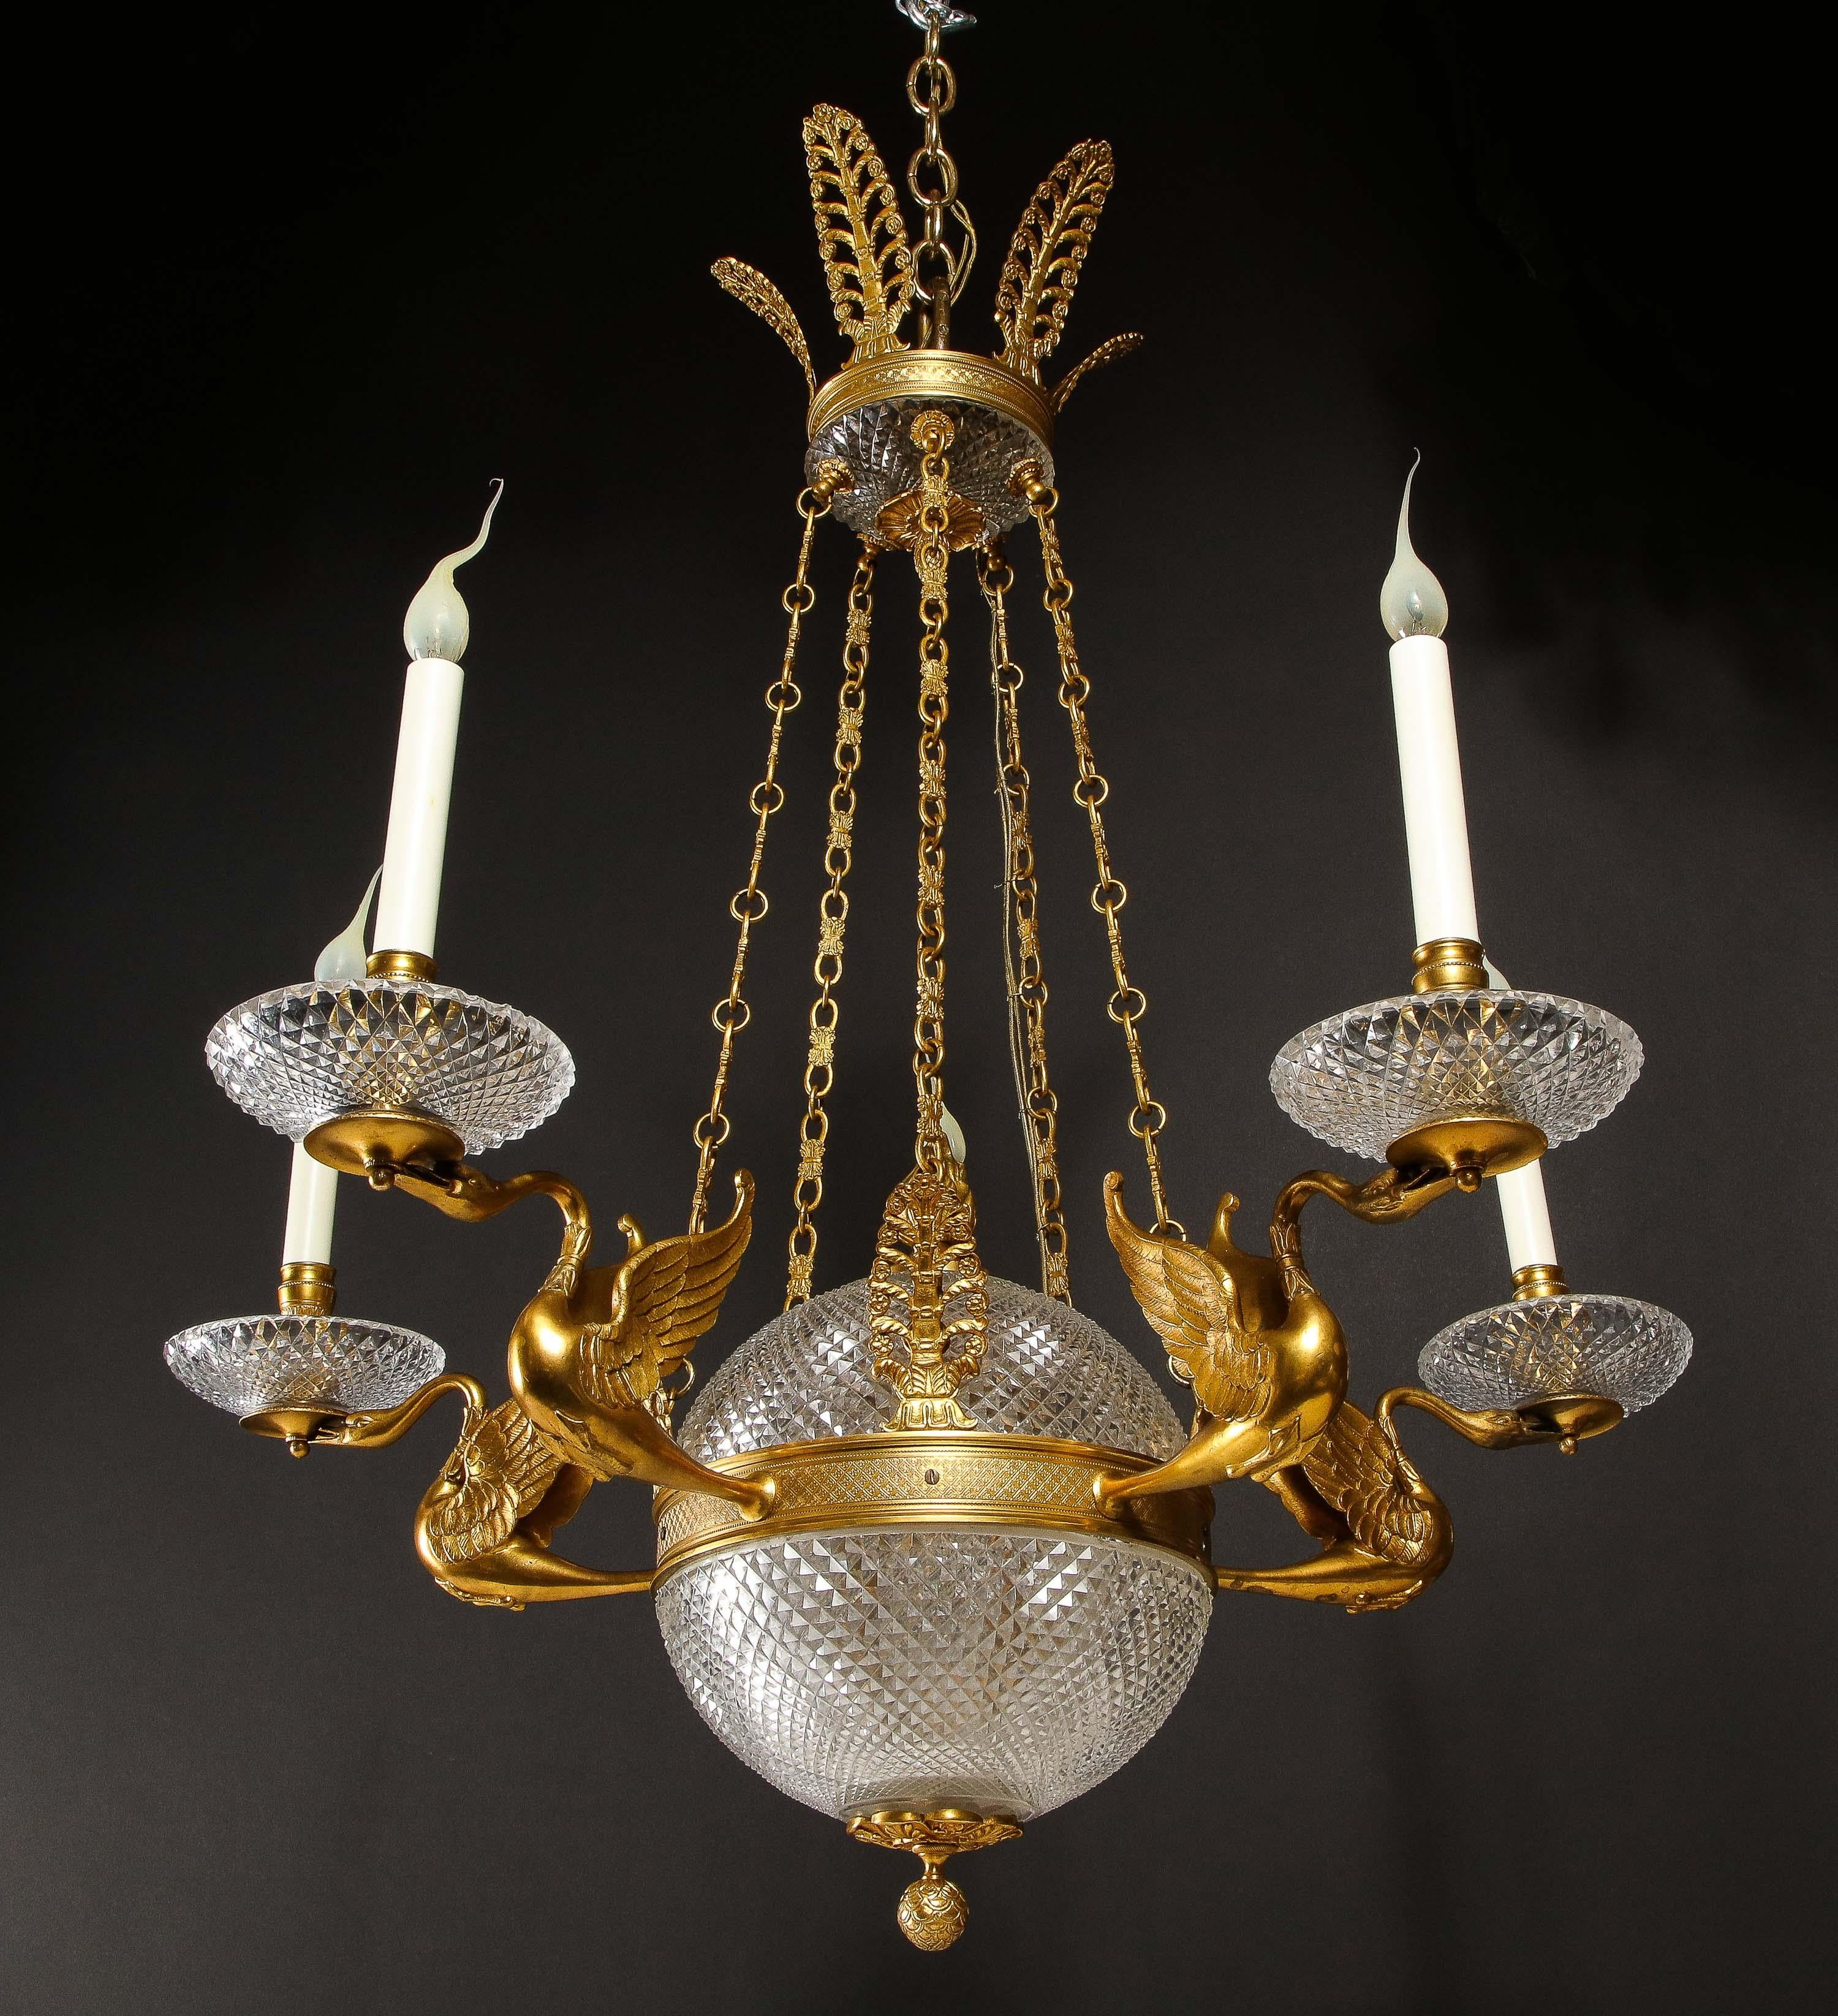 Hollywood Regency Antique French Ball Form Gilt Bronze and Crystal Chandelier For Sale 16